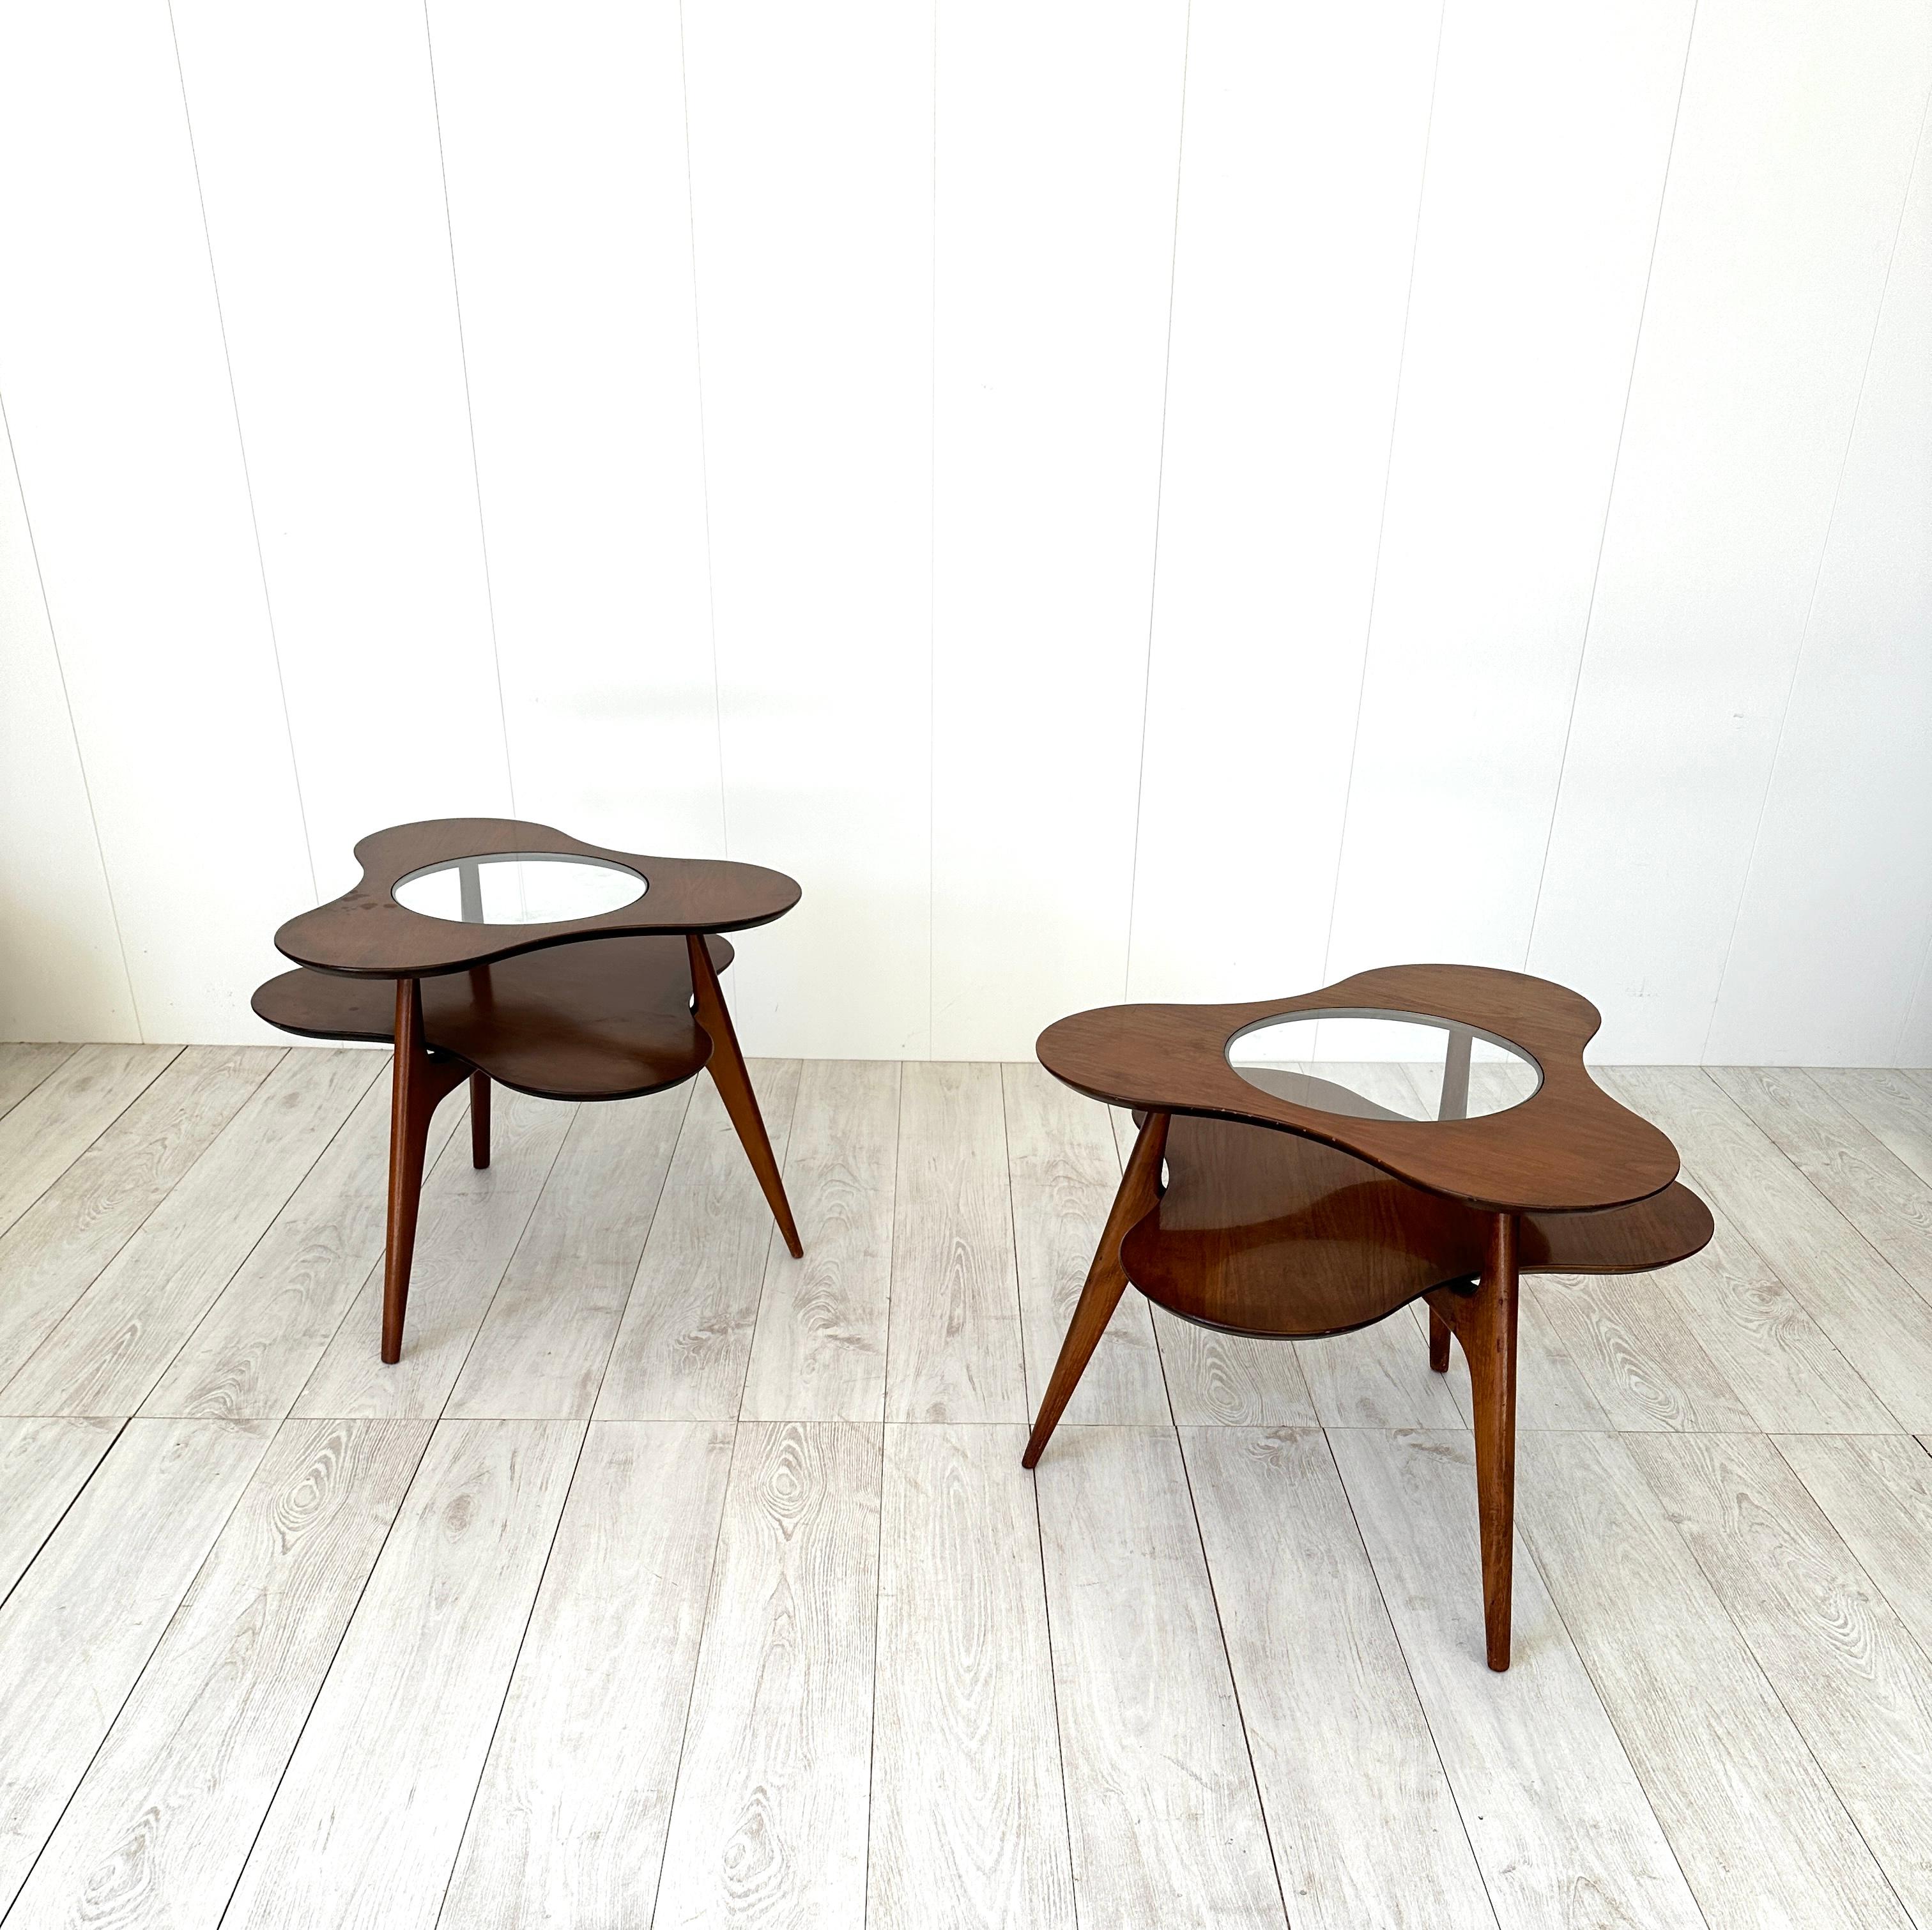 Glass Pair of flower-shaped side tables, Italian production 1950s For Sale